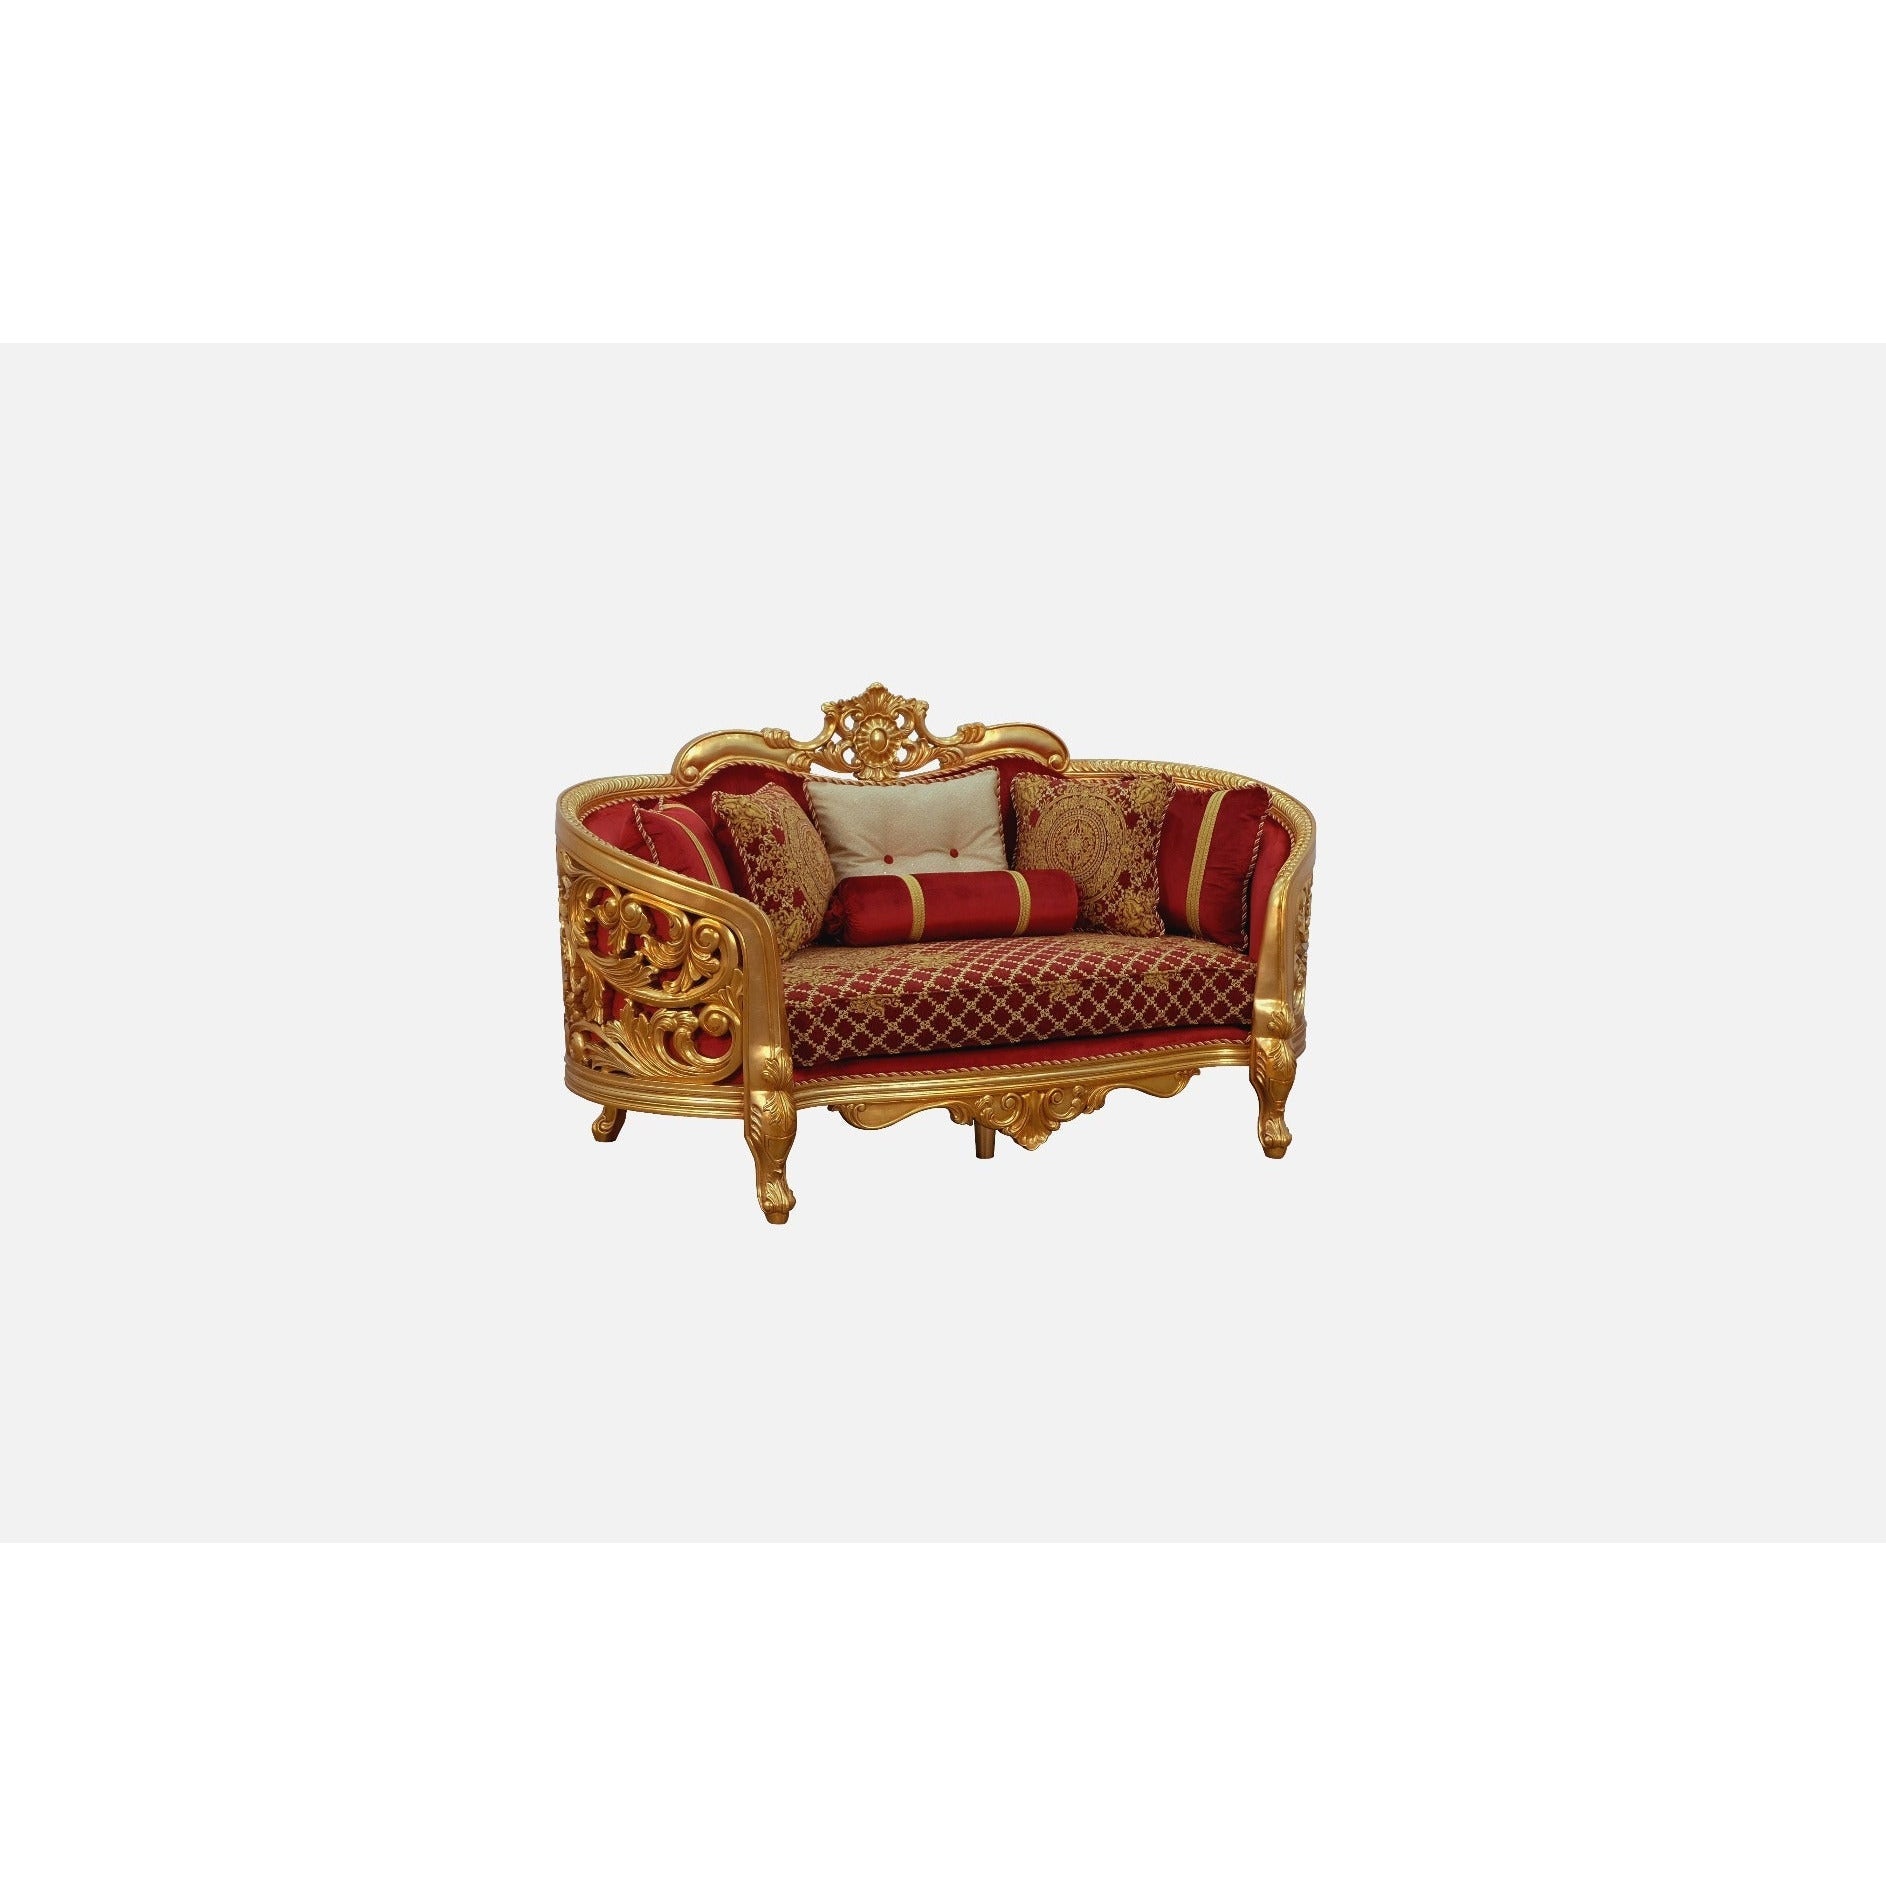 European Furniture - Bellagio II 2 Piece Living Room Set in Red-Gold - 30013-2SET - New Star Living